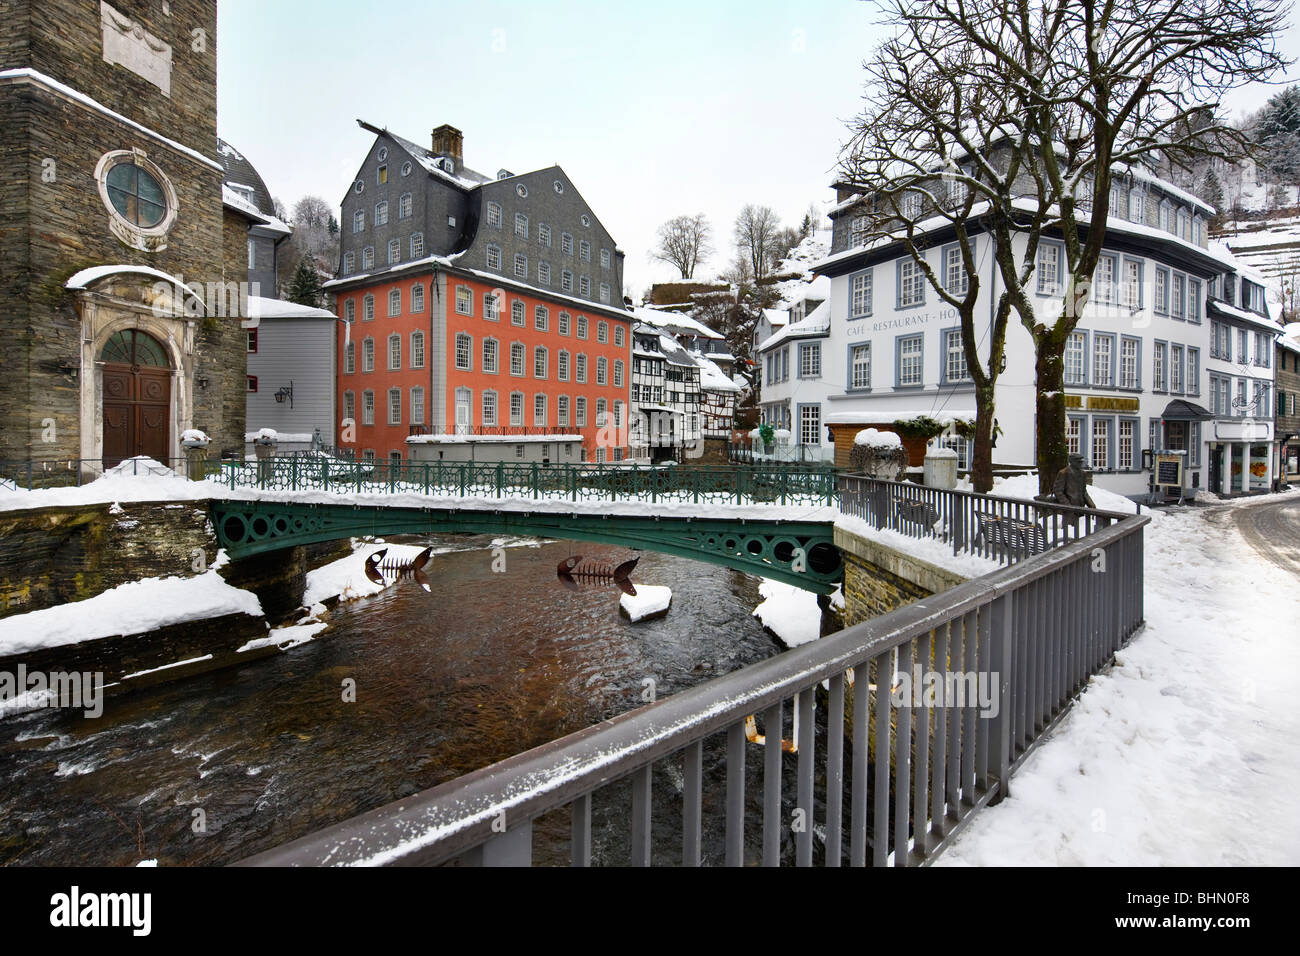 Historic center of Monschau at the Rur river in the snow in winter, Eifel, North Rhine-Westphalia, Germany Stock Photo